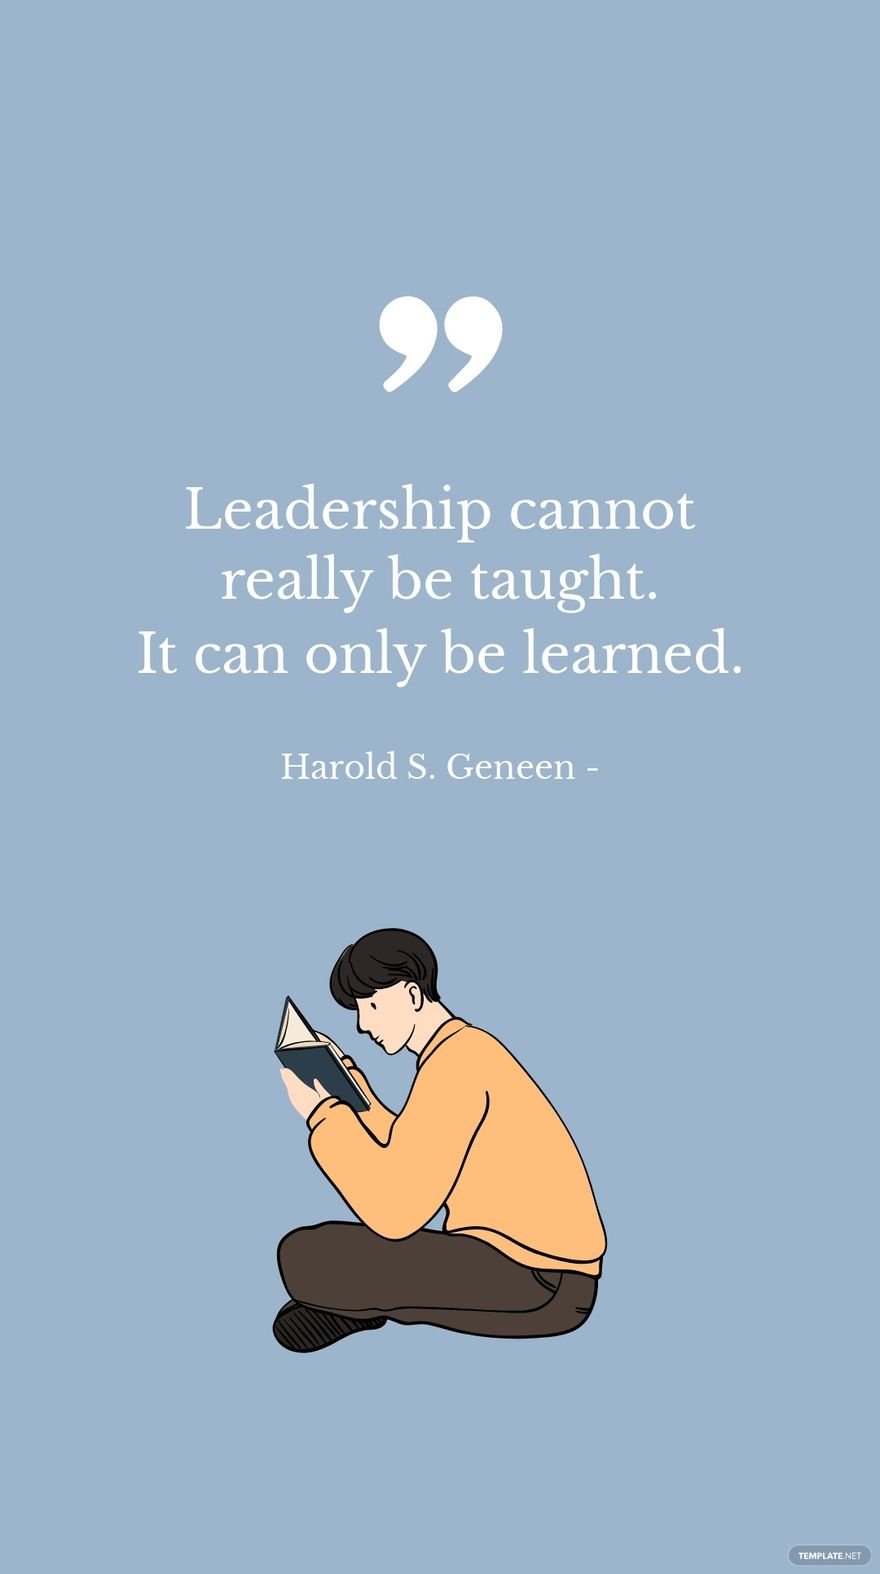 Free Harold S. Geneen - Leadership cannot really be taught. It can only be learned.